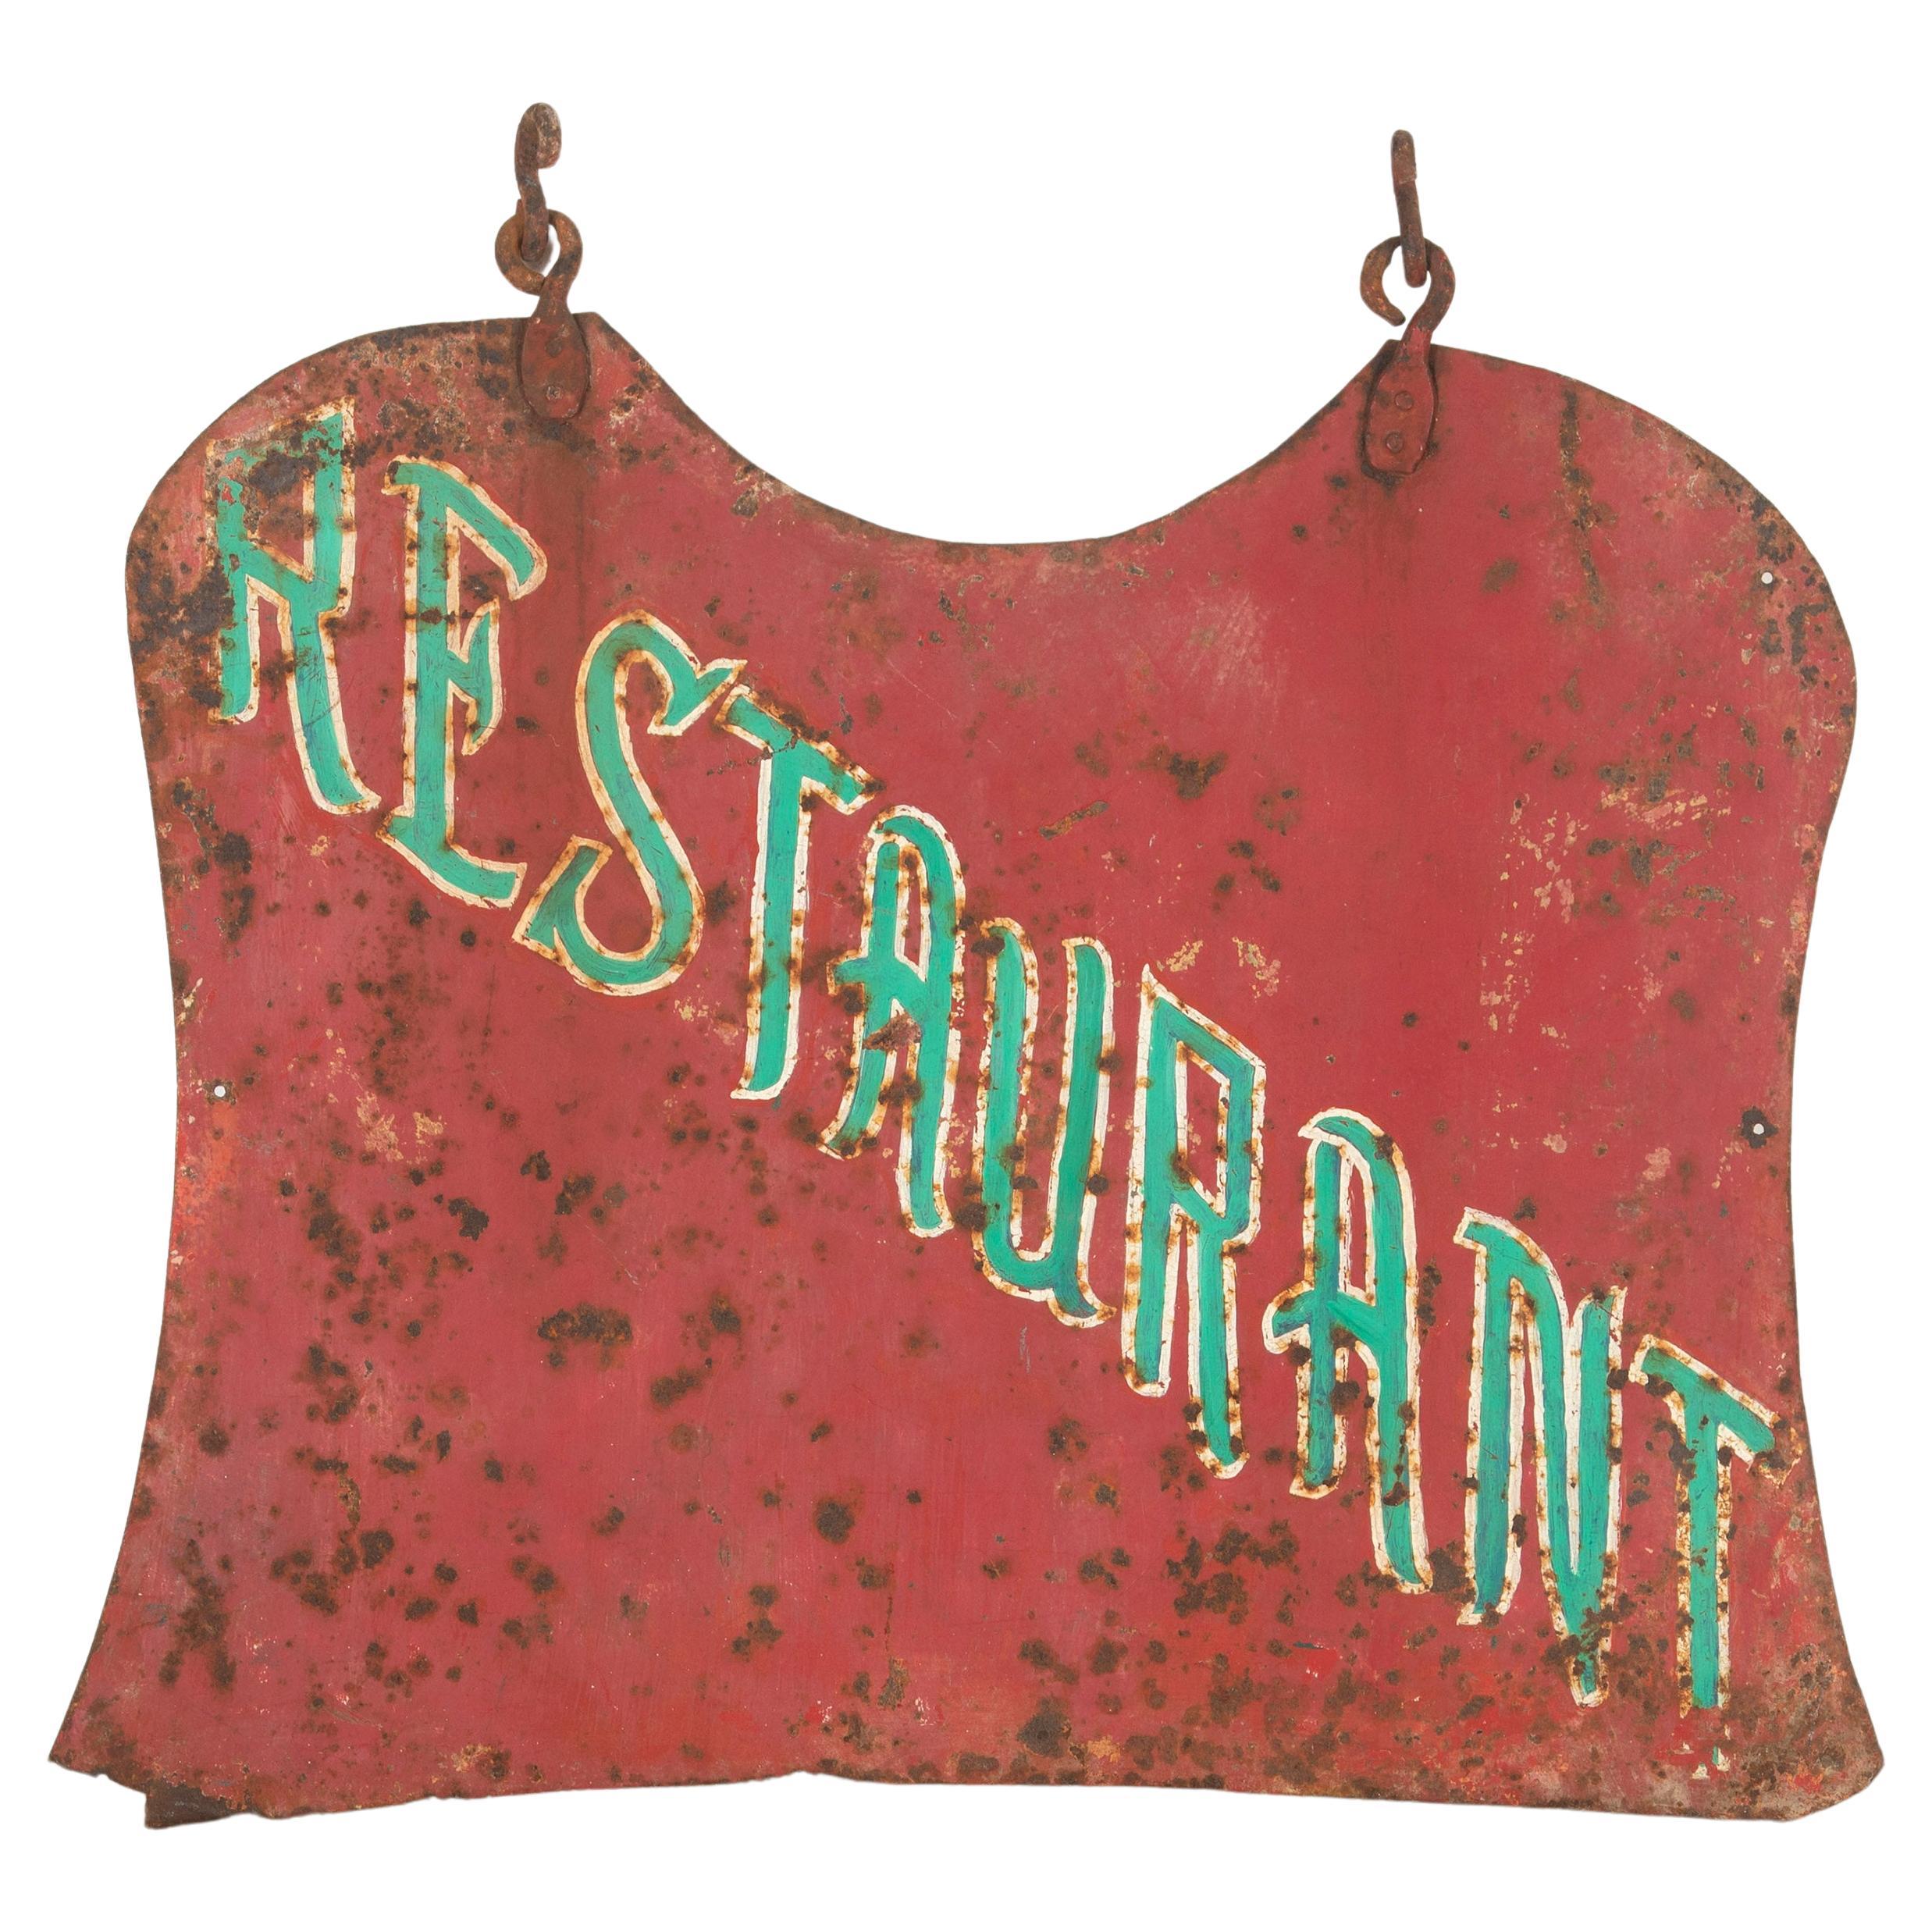 French Painted Restaurant Trade Sign